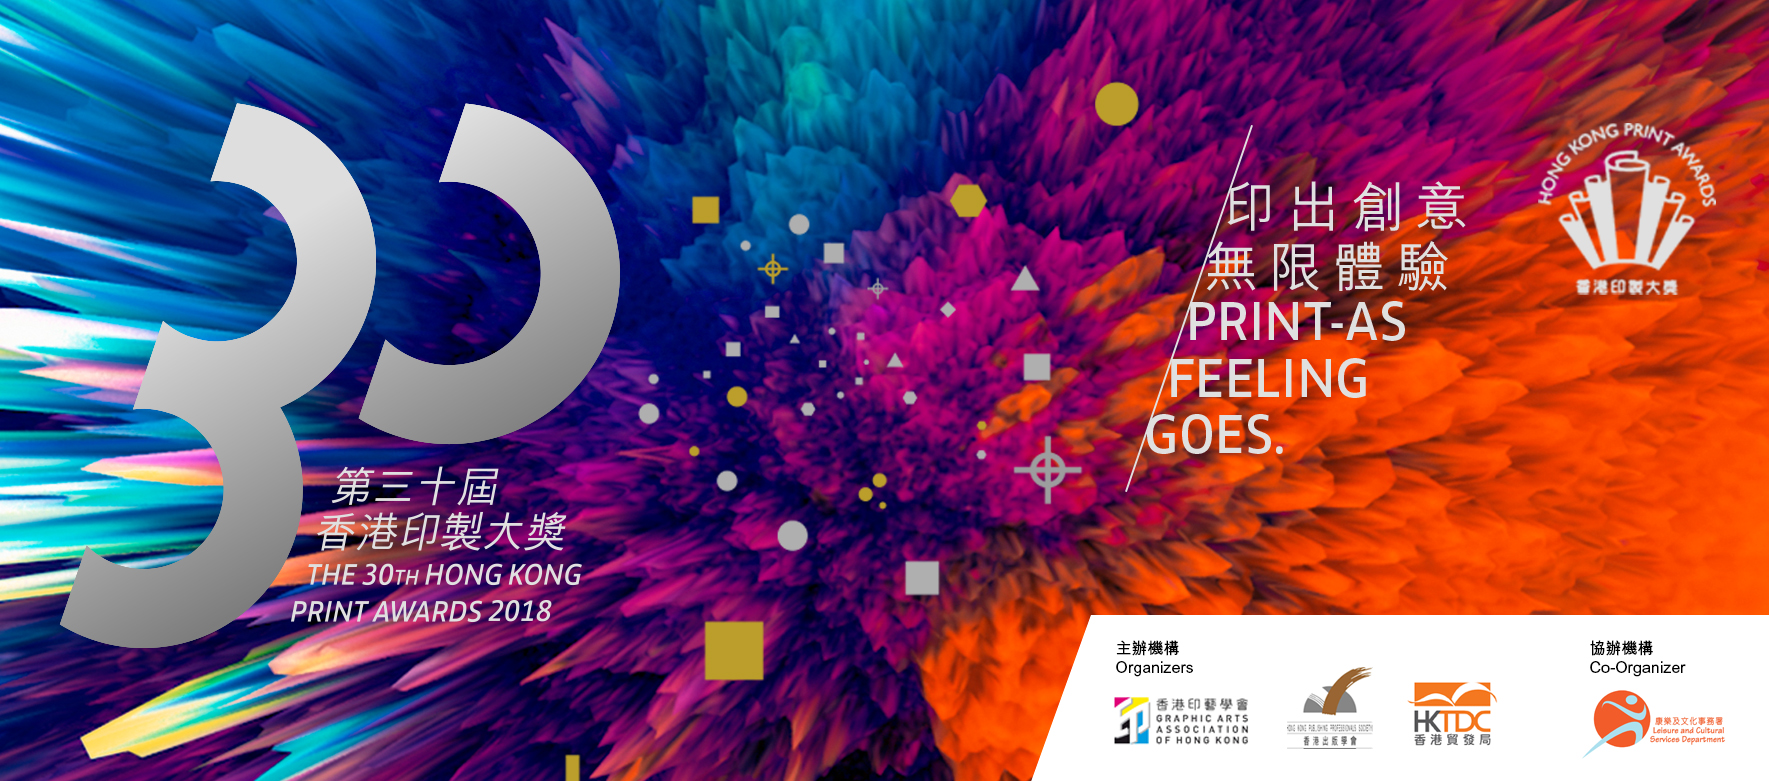 Supporting Event - The 30th Hong Kong Print Awards 2018 (Call for Entry)